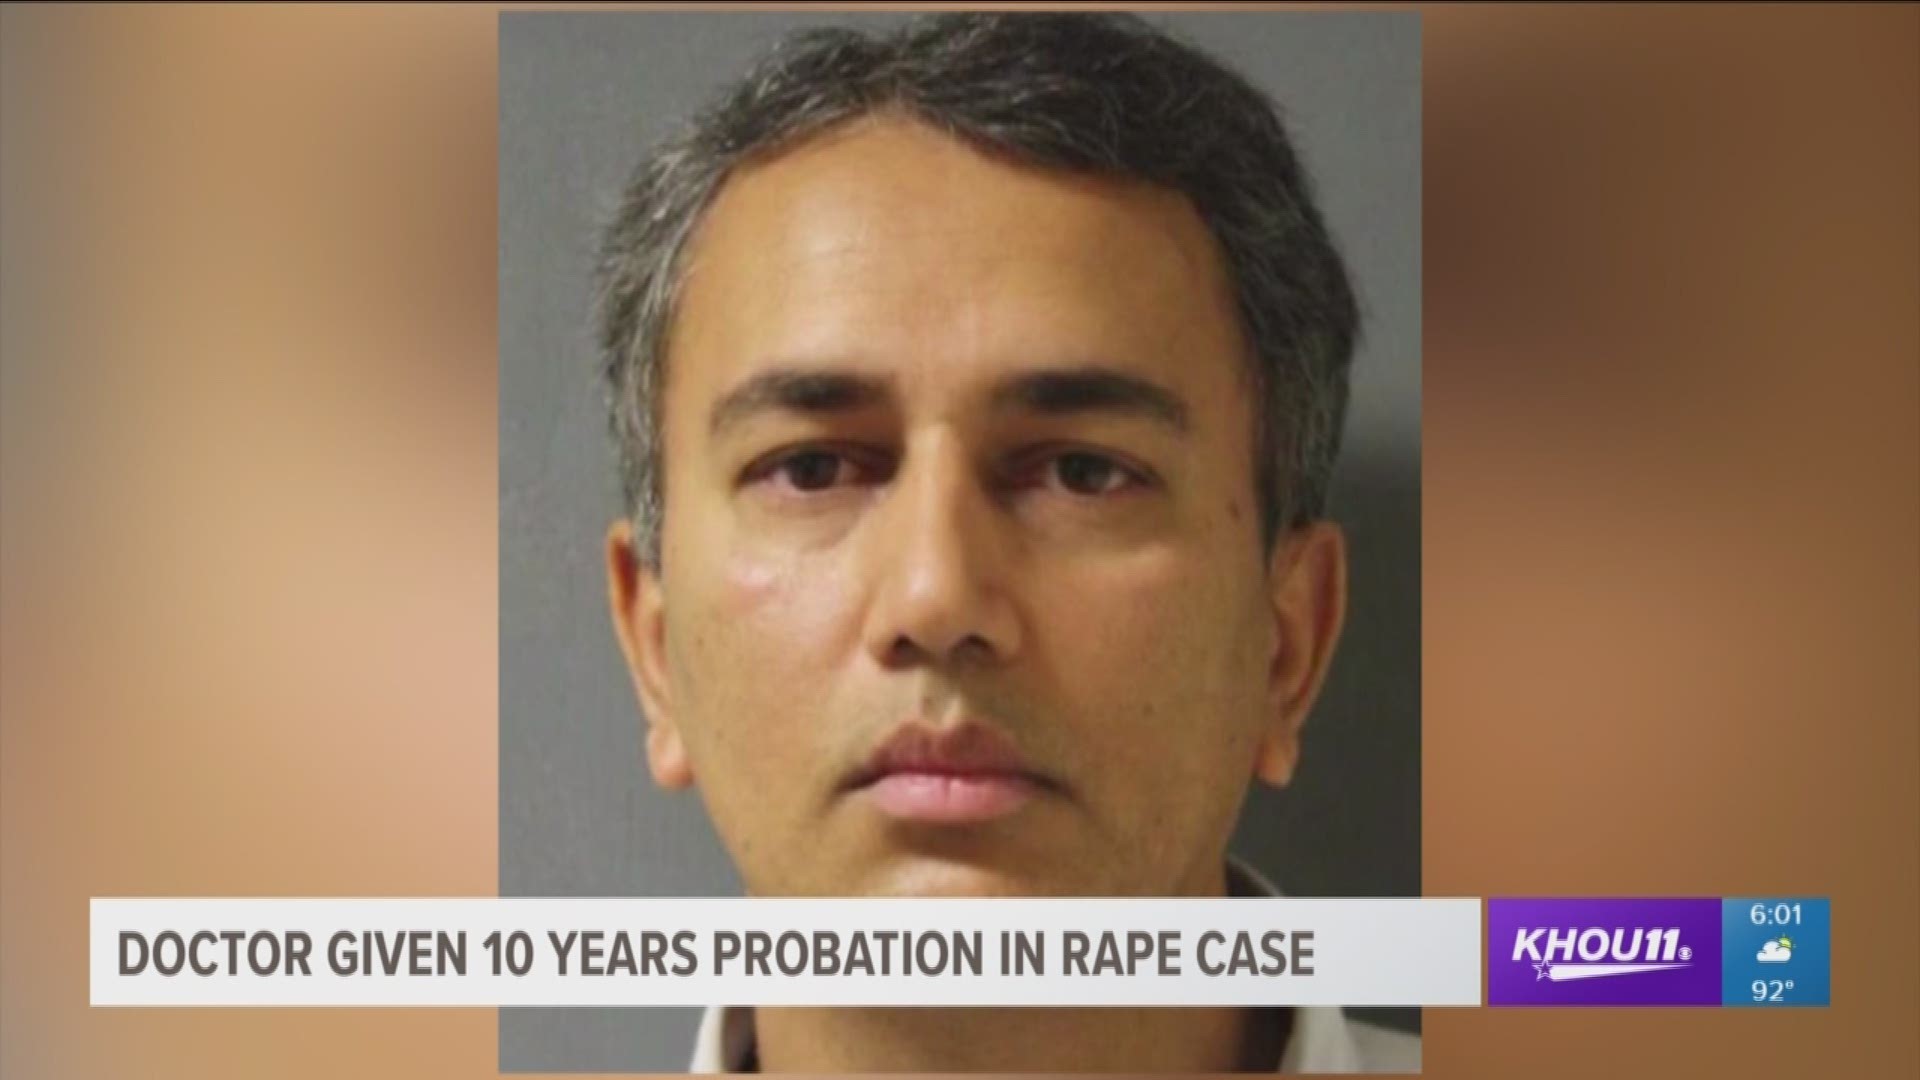 A former doctor at Baylor College of Medicine gets 10 years' probation for raping a patient while she was heavily sedated.